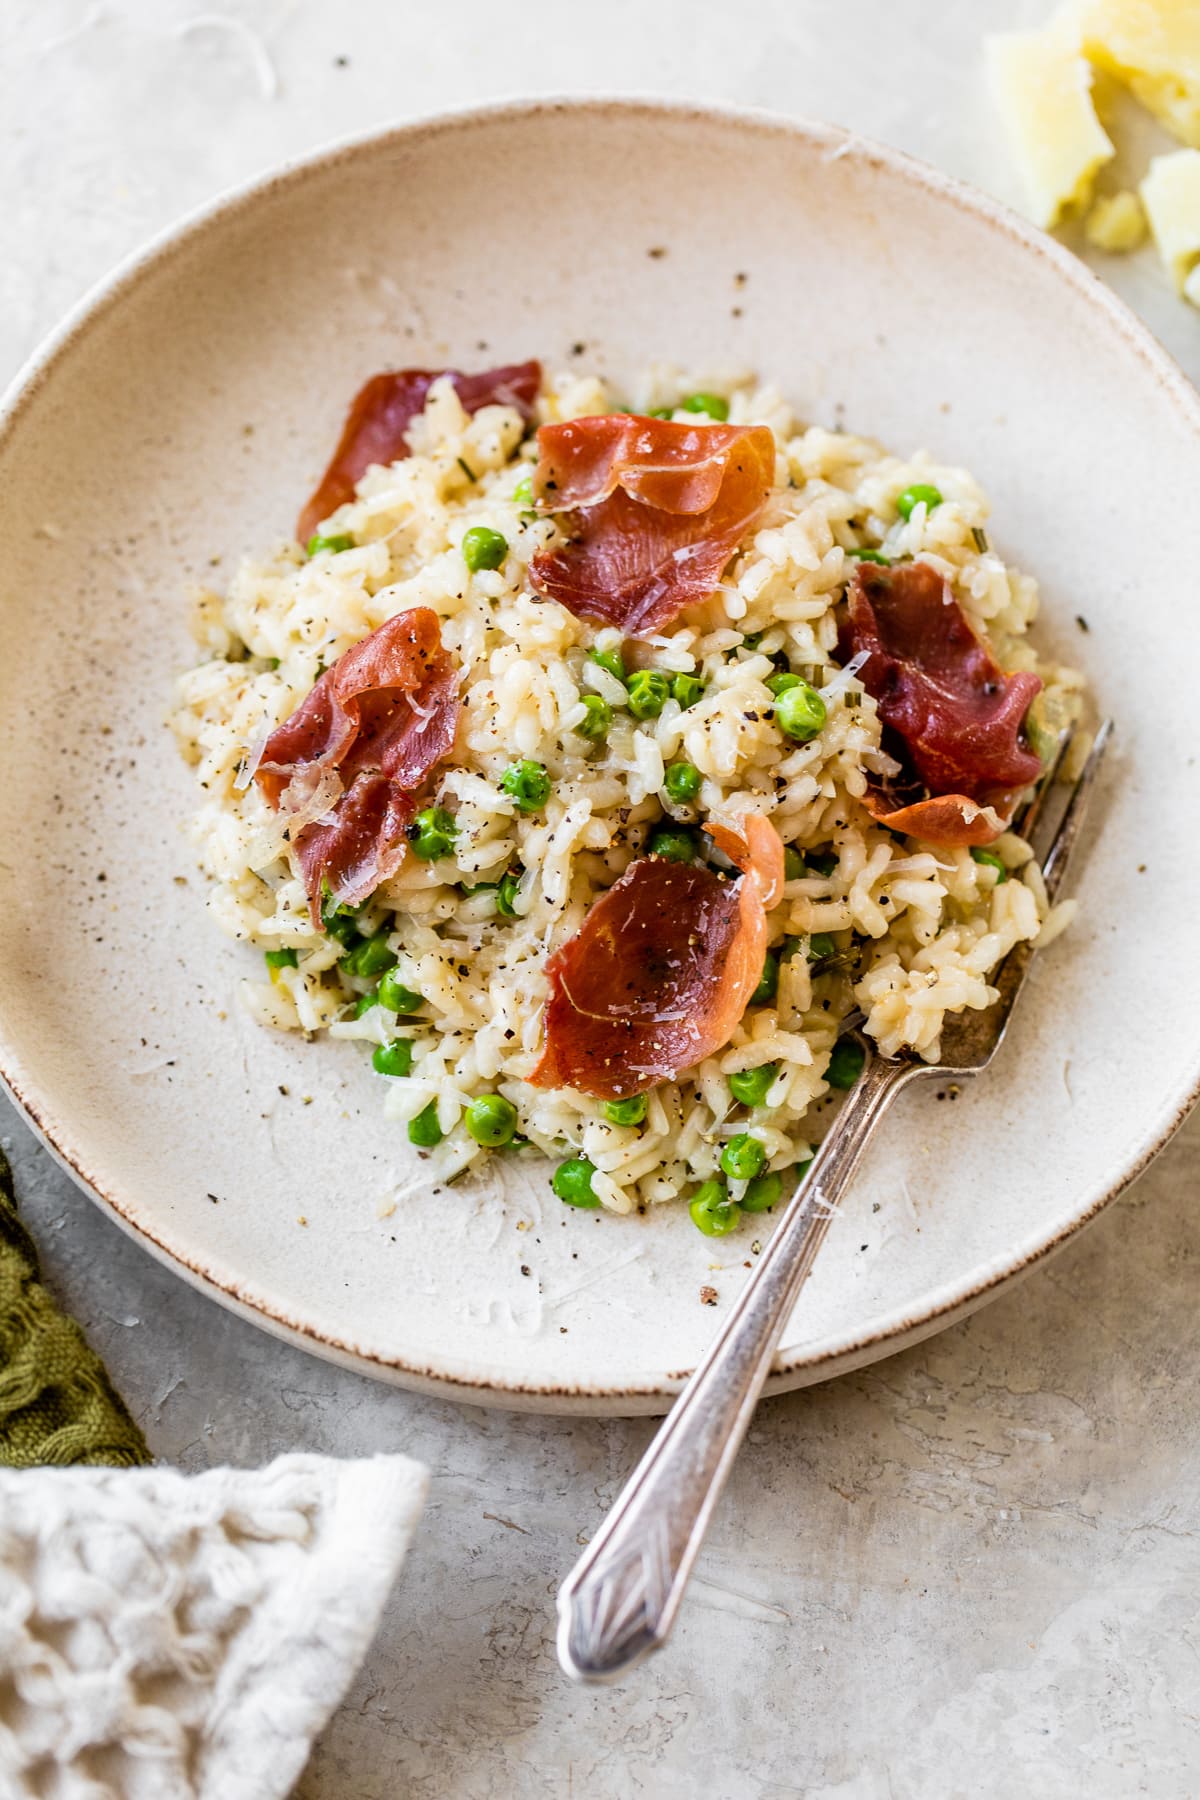 Overhead view of a bowl of Instant Pot risotto with prosciutto